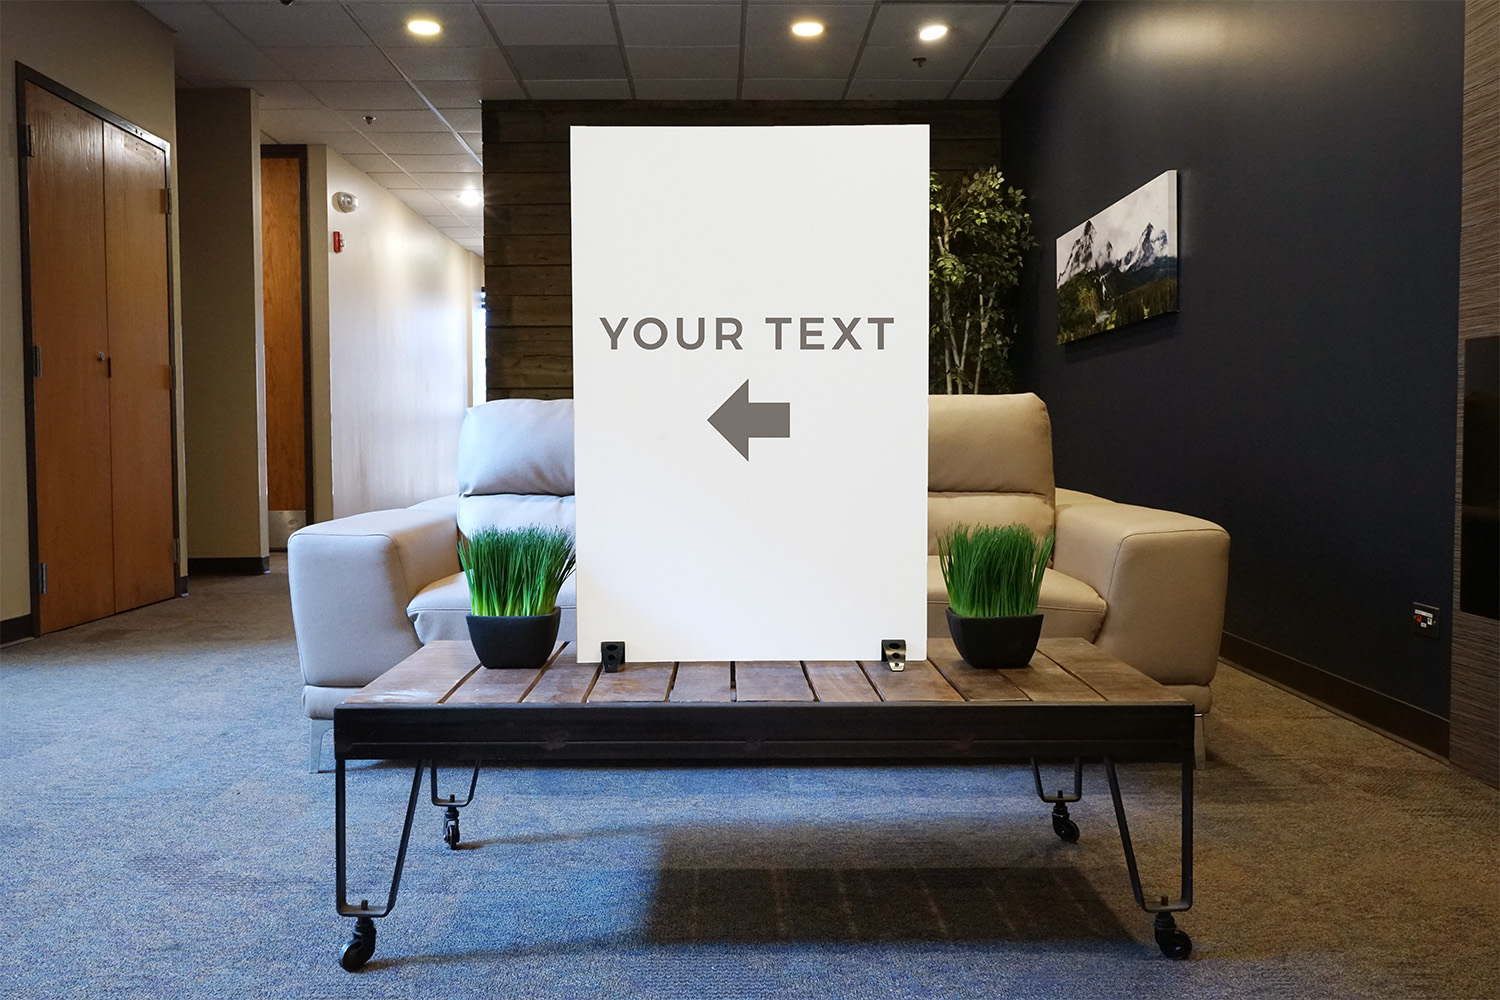 Rigid Signs, Colorful Lights Products, Colorful Lights Your Text, 23 x 11.5 6